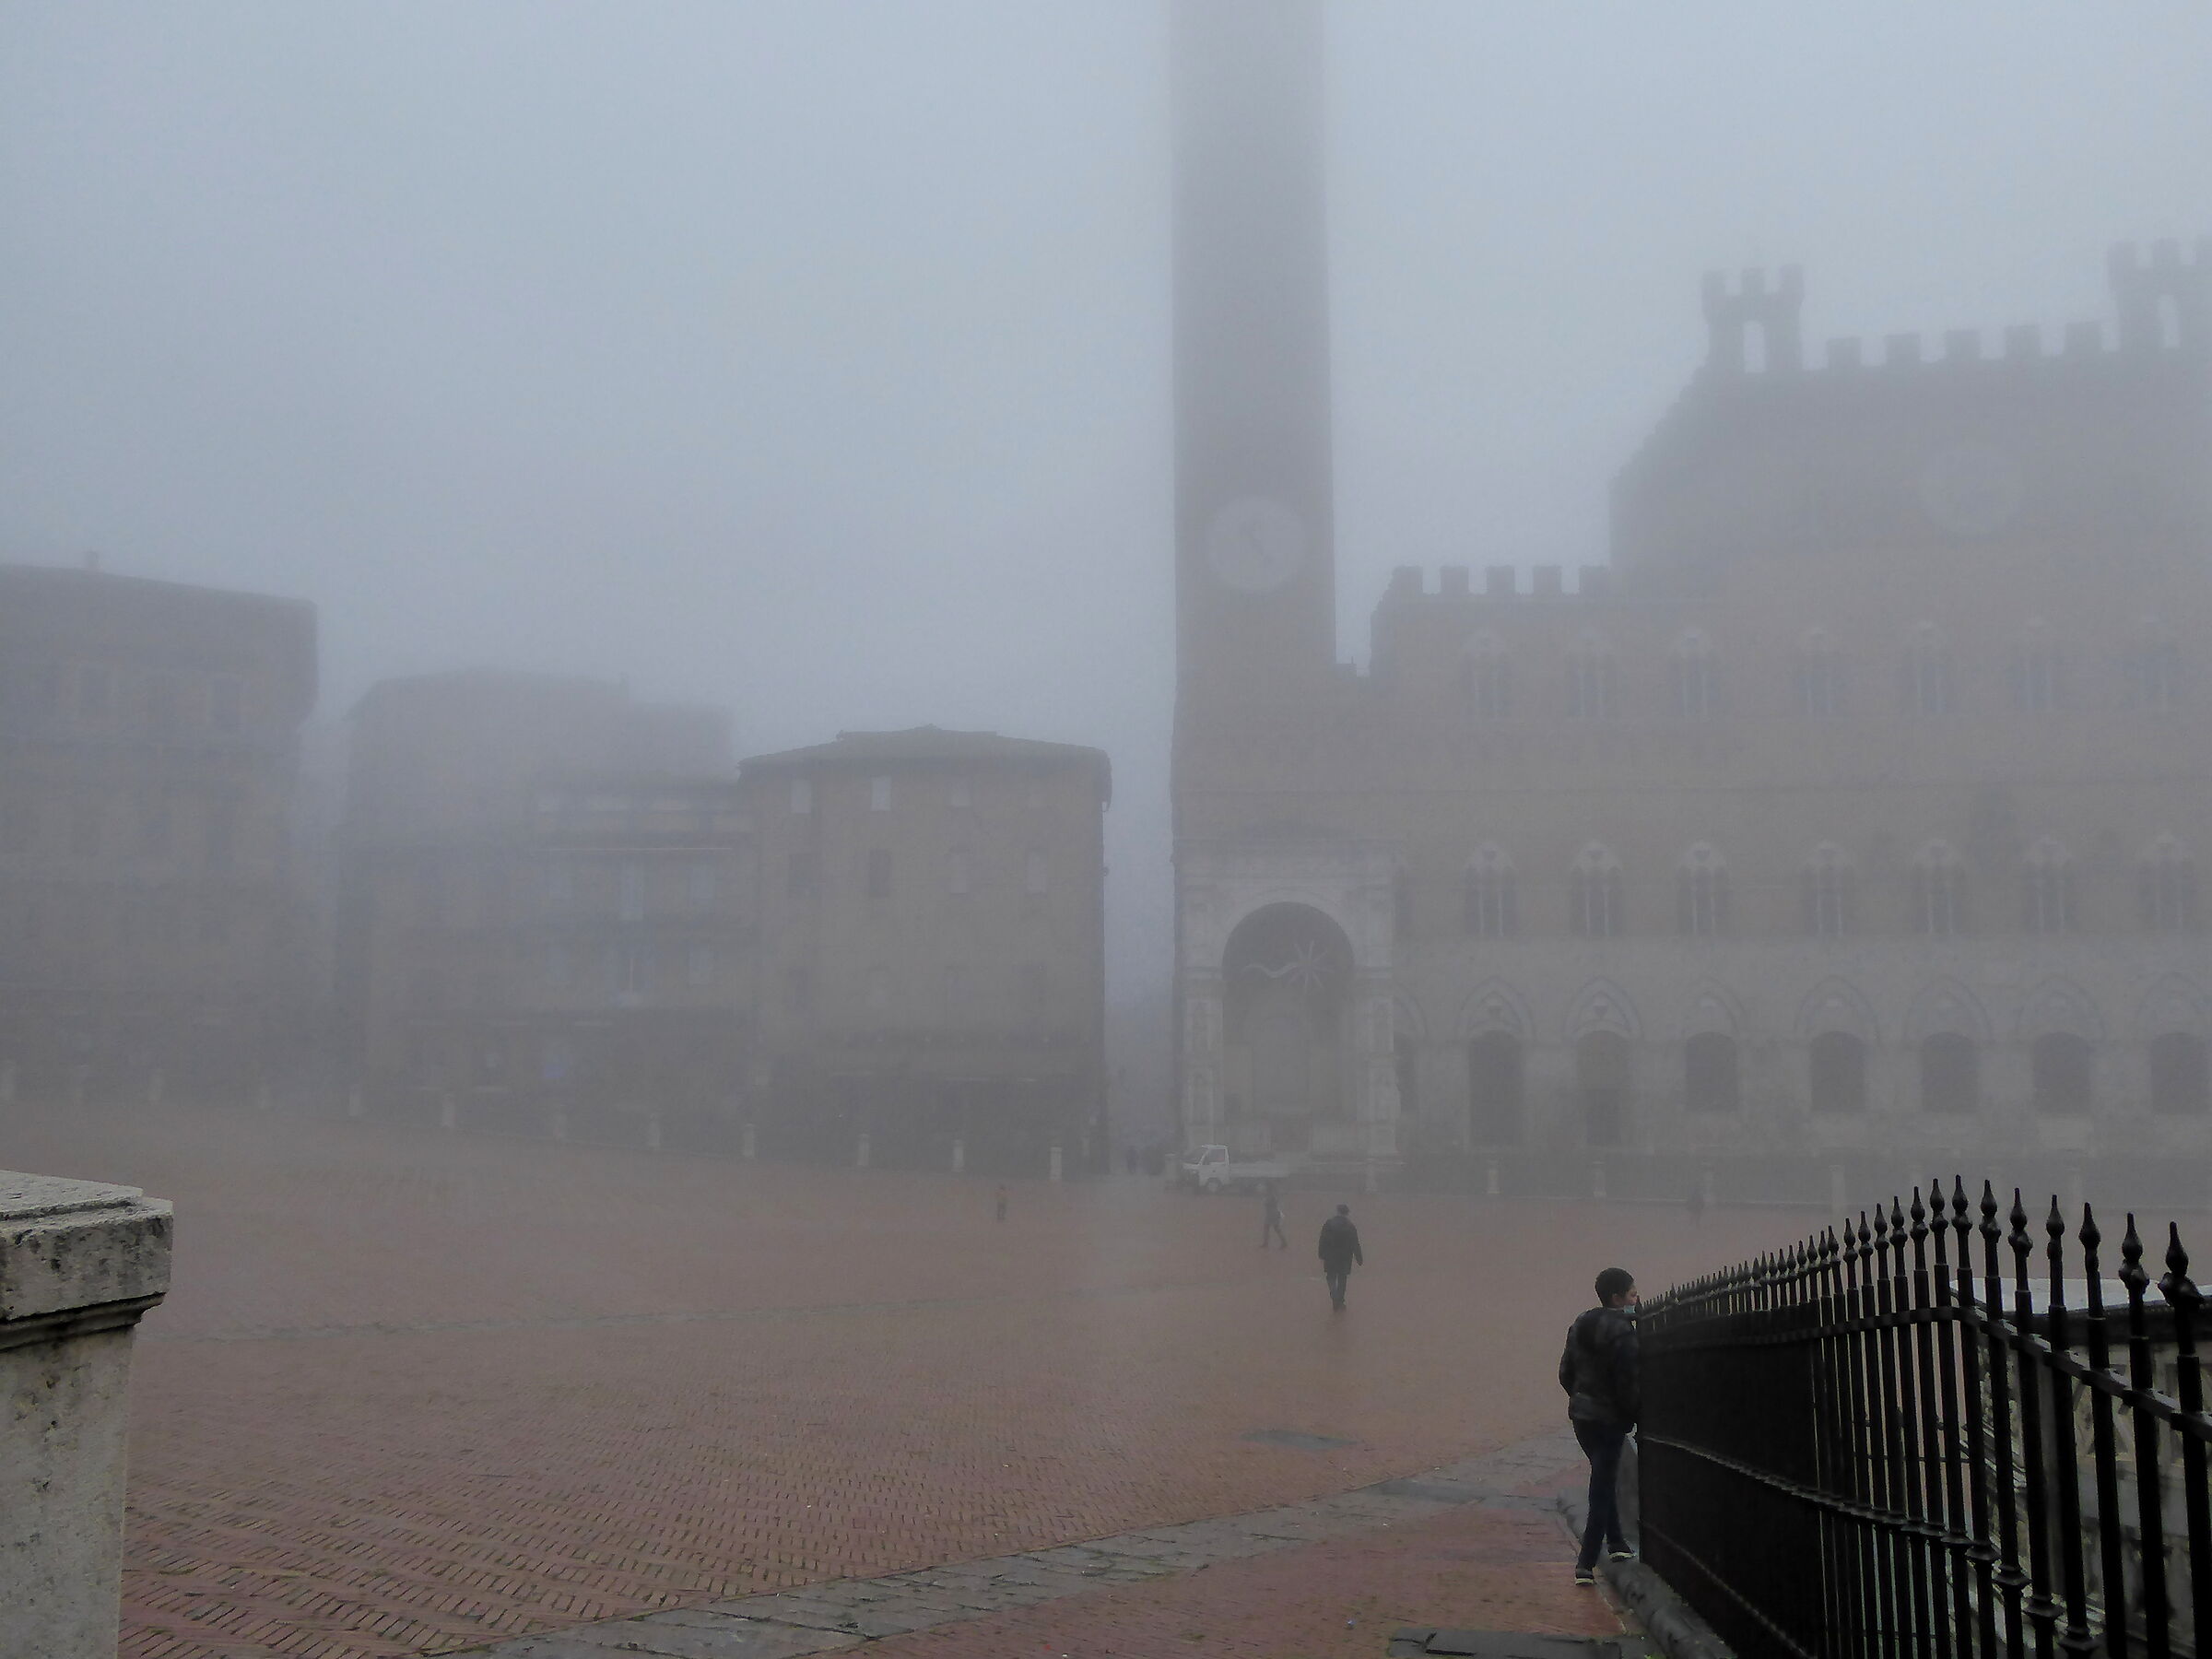 this morning in Piazza del Campo...